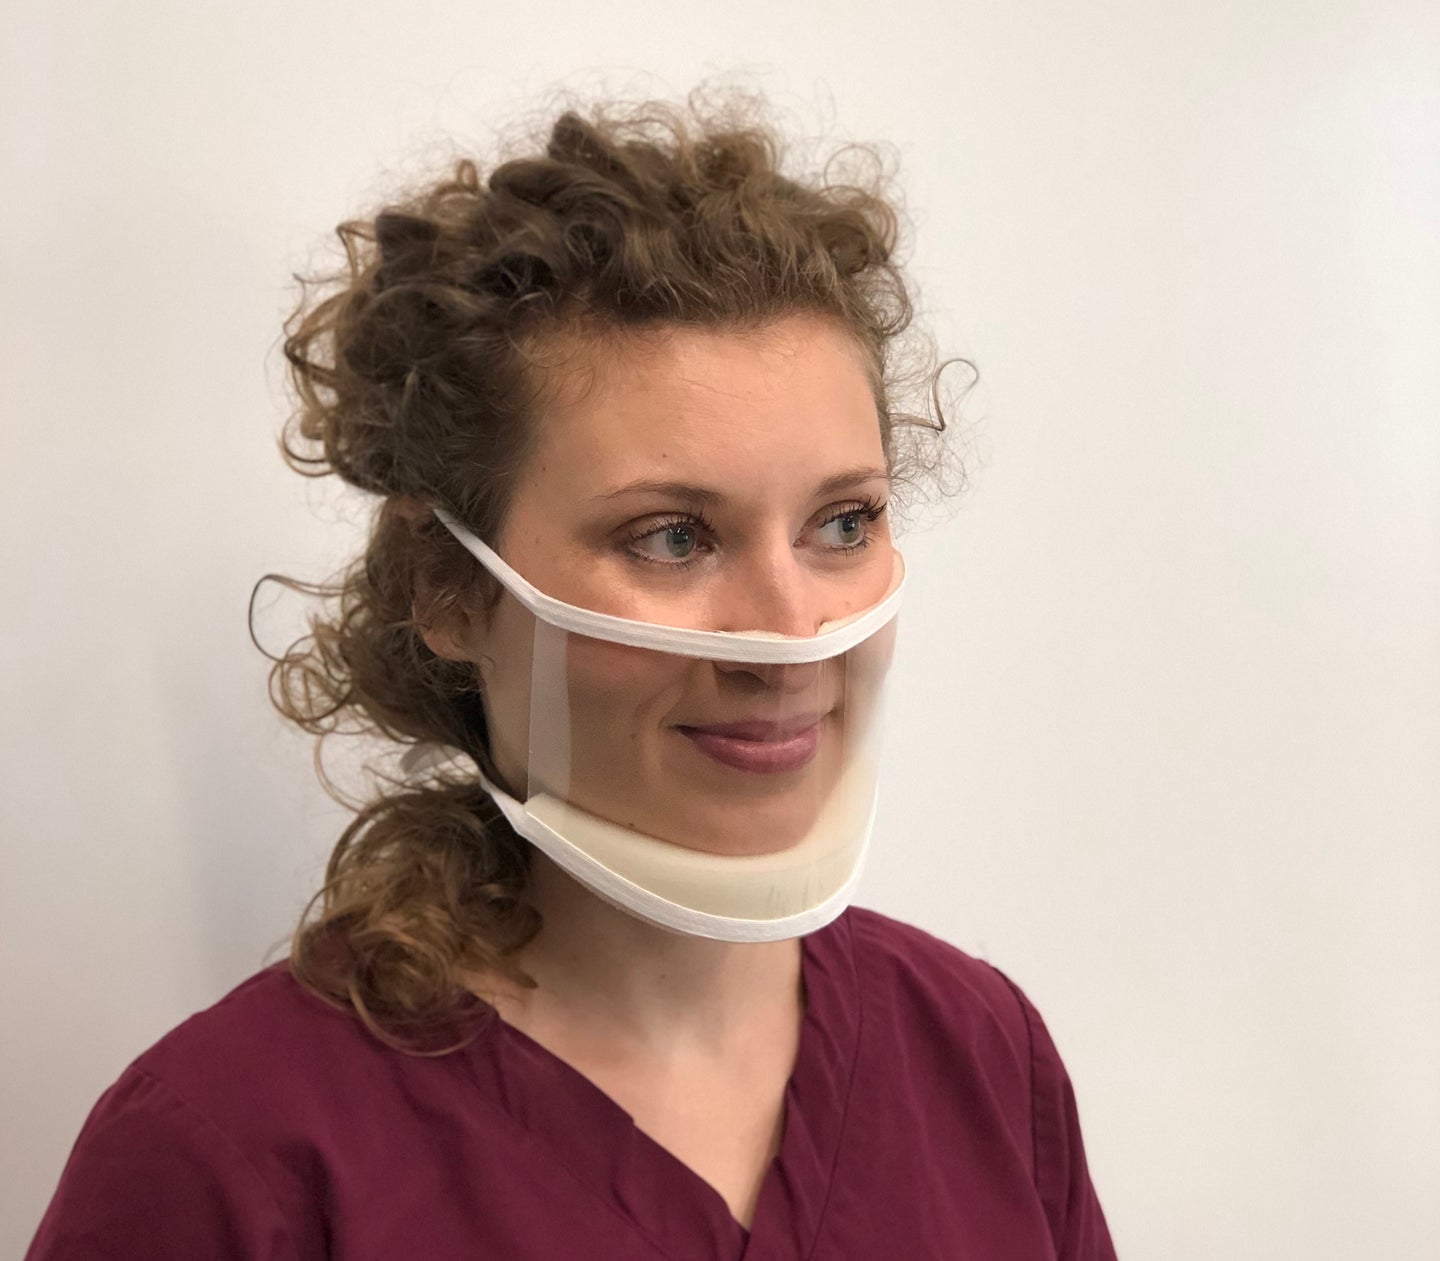 Founded in 2017, ClearMask makes plastic face guards for surgeons and other medical practitioners. Now it's turning its attention to pandemic equipment.